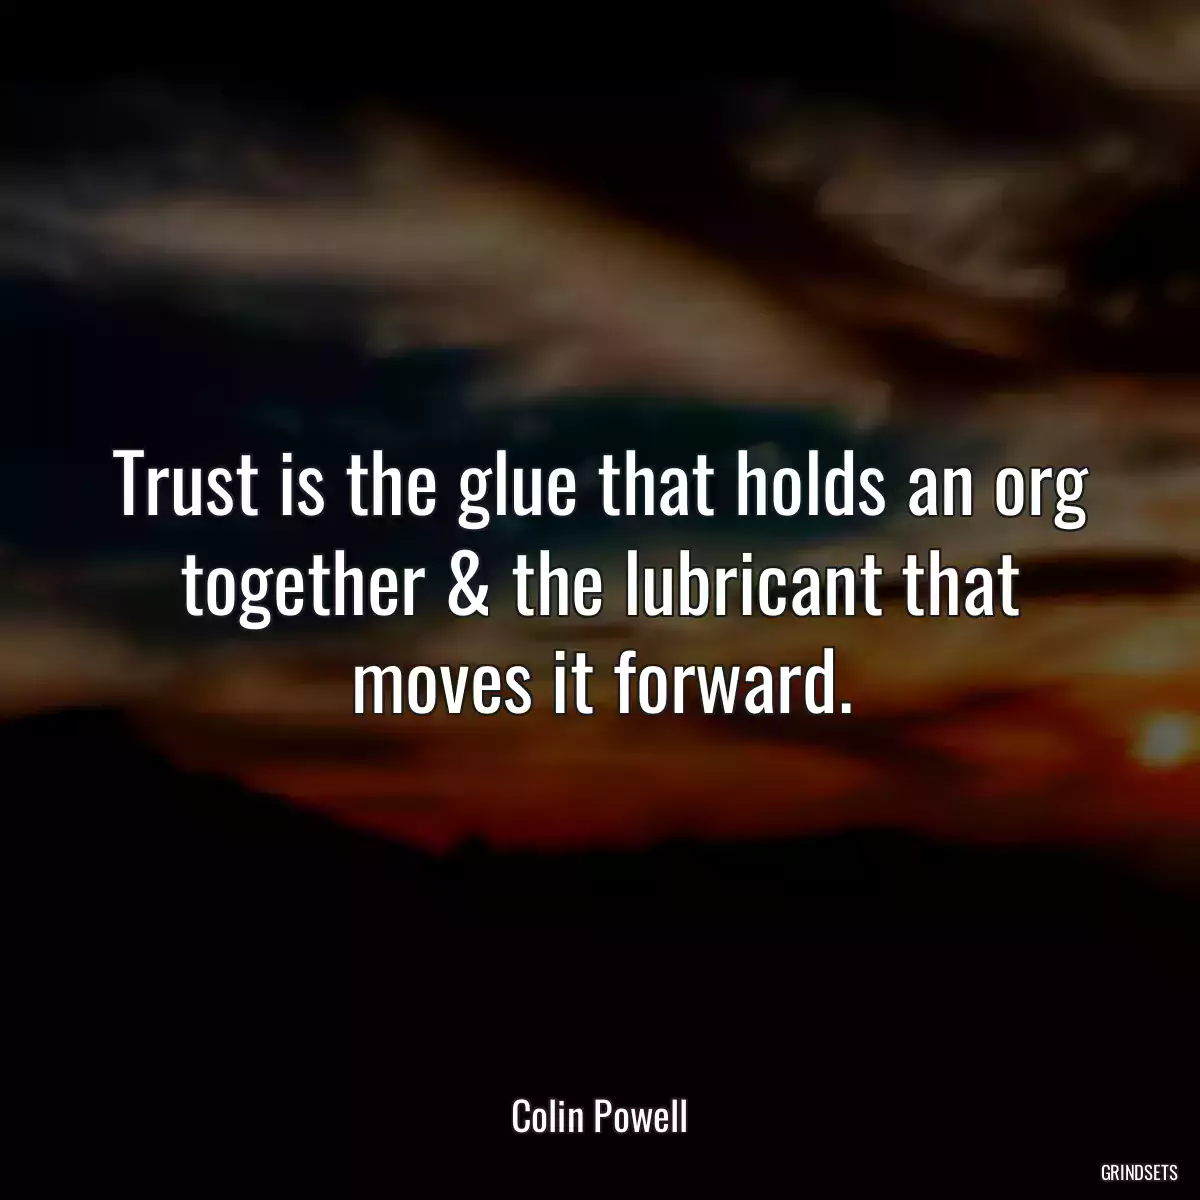 Trust is the glue that holds an org together & the lubricant that moves it forward.